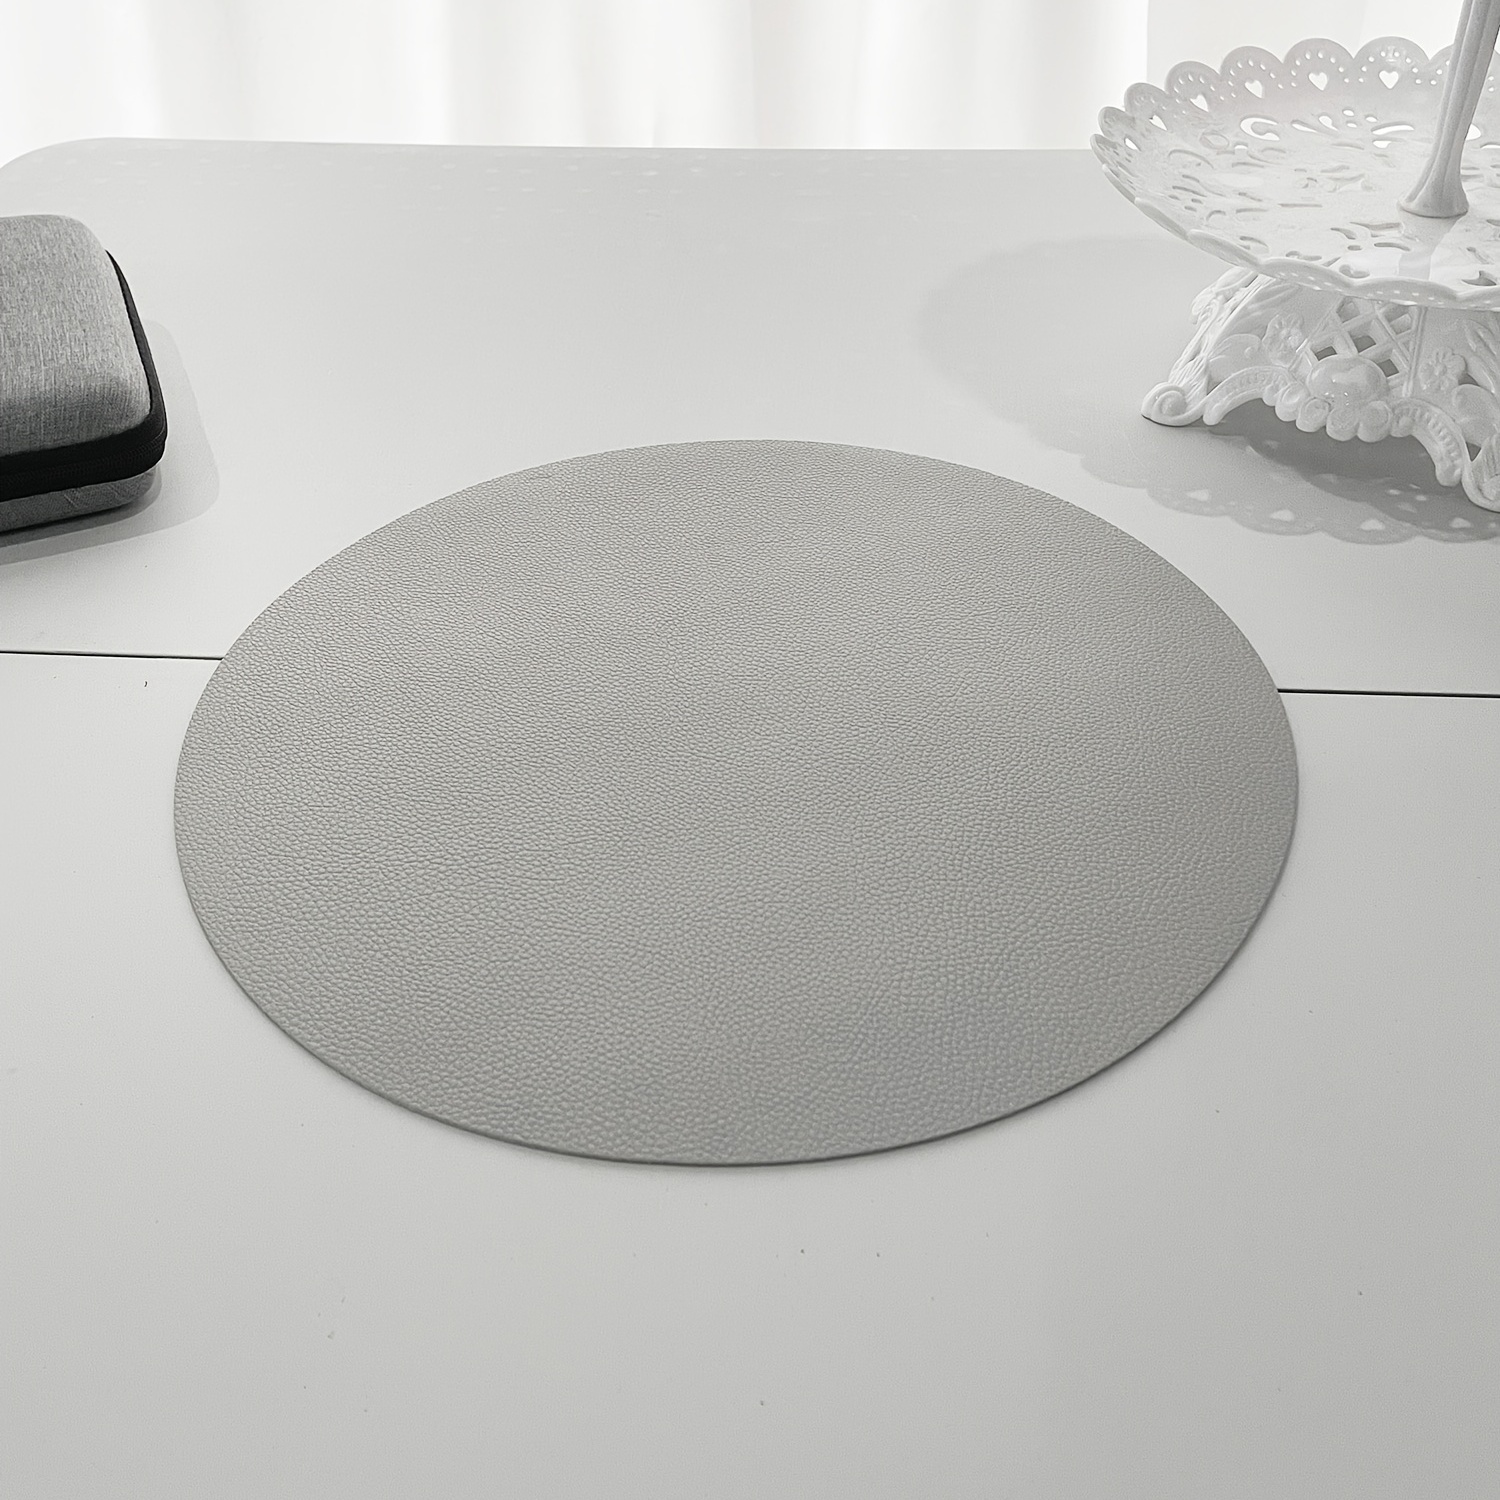 Black Faux Leather Round Placemat